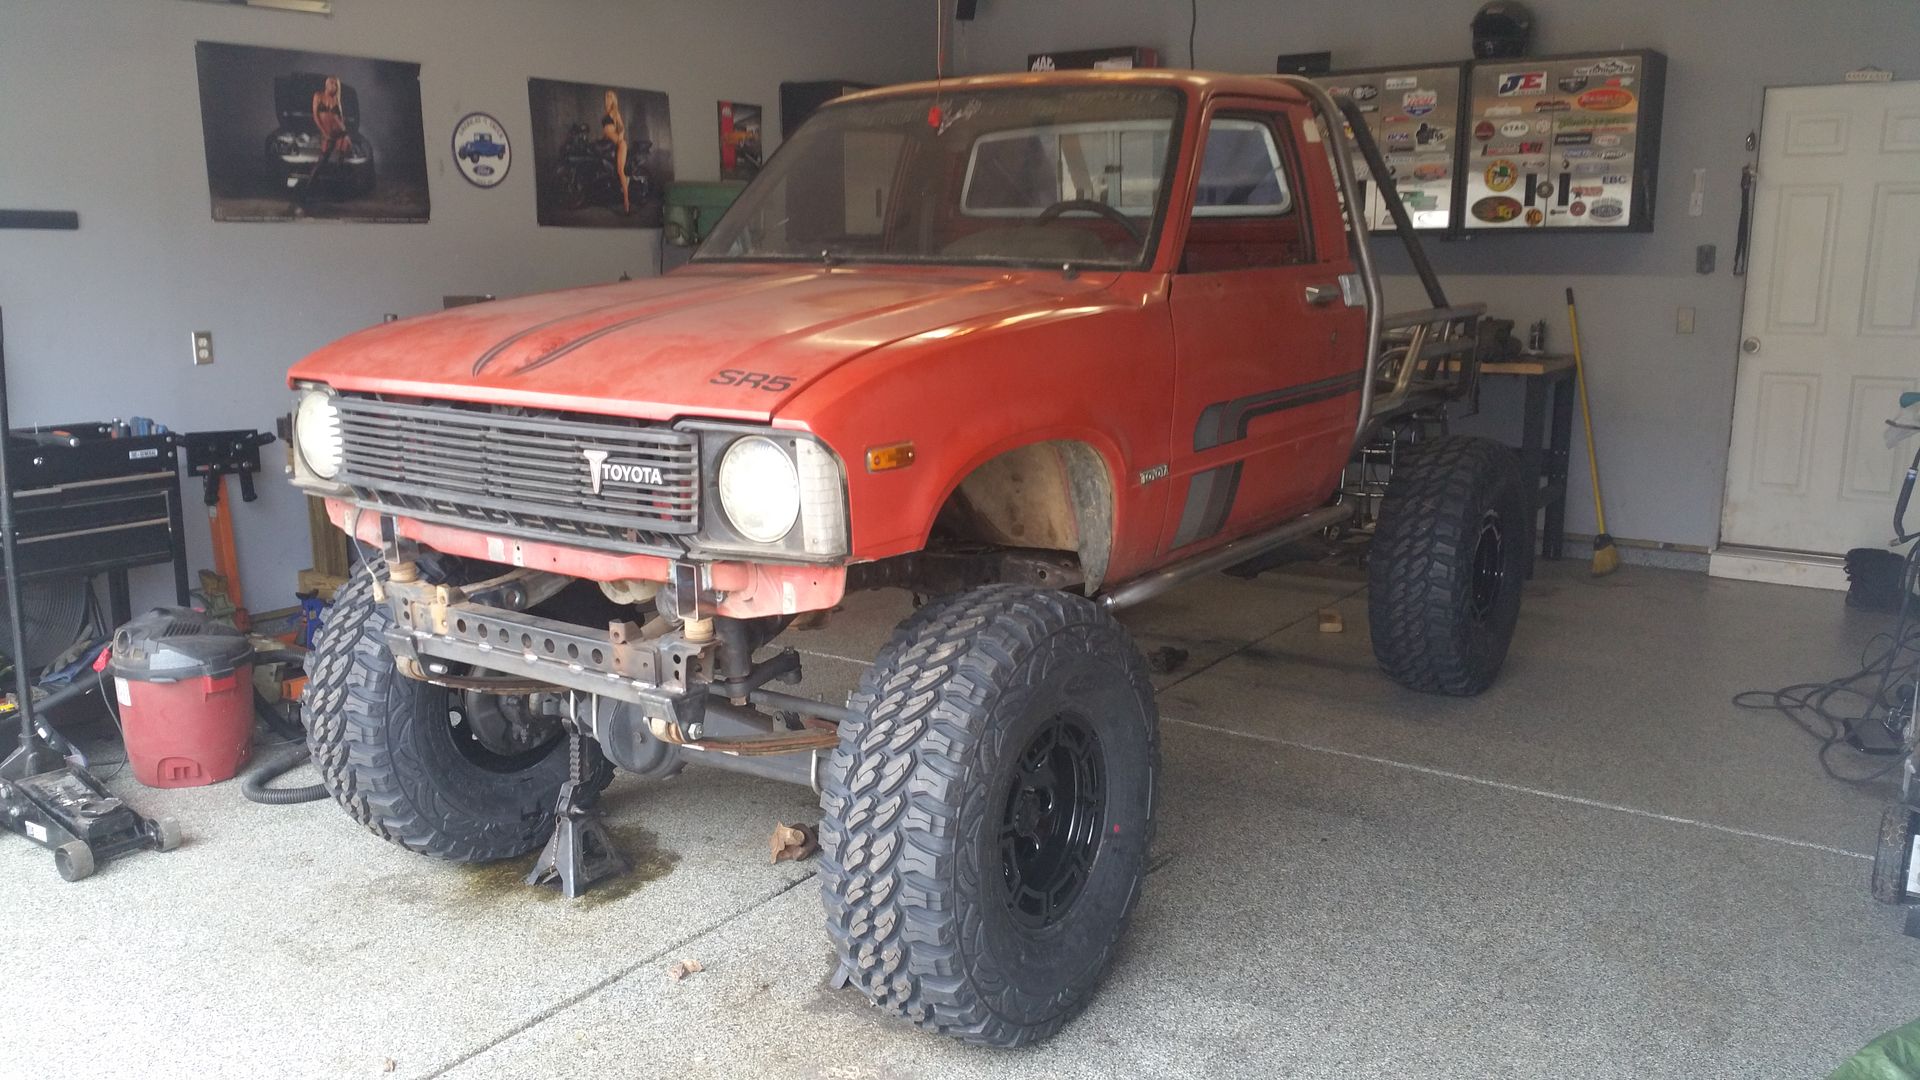 1980 Pickup build - Page 2 - Pirate4x4.Com : 4x4 and Off-Road Forum